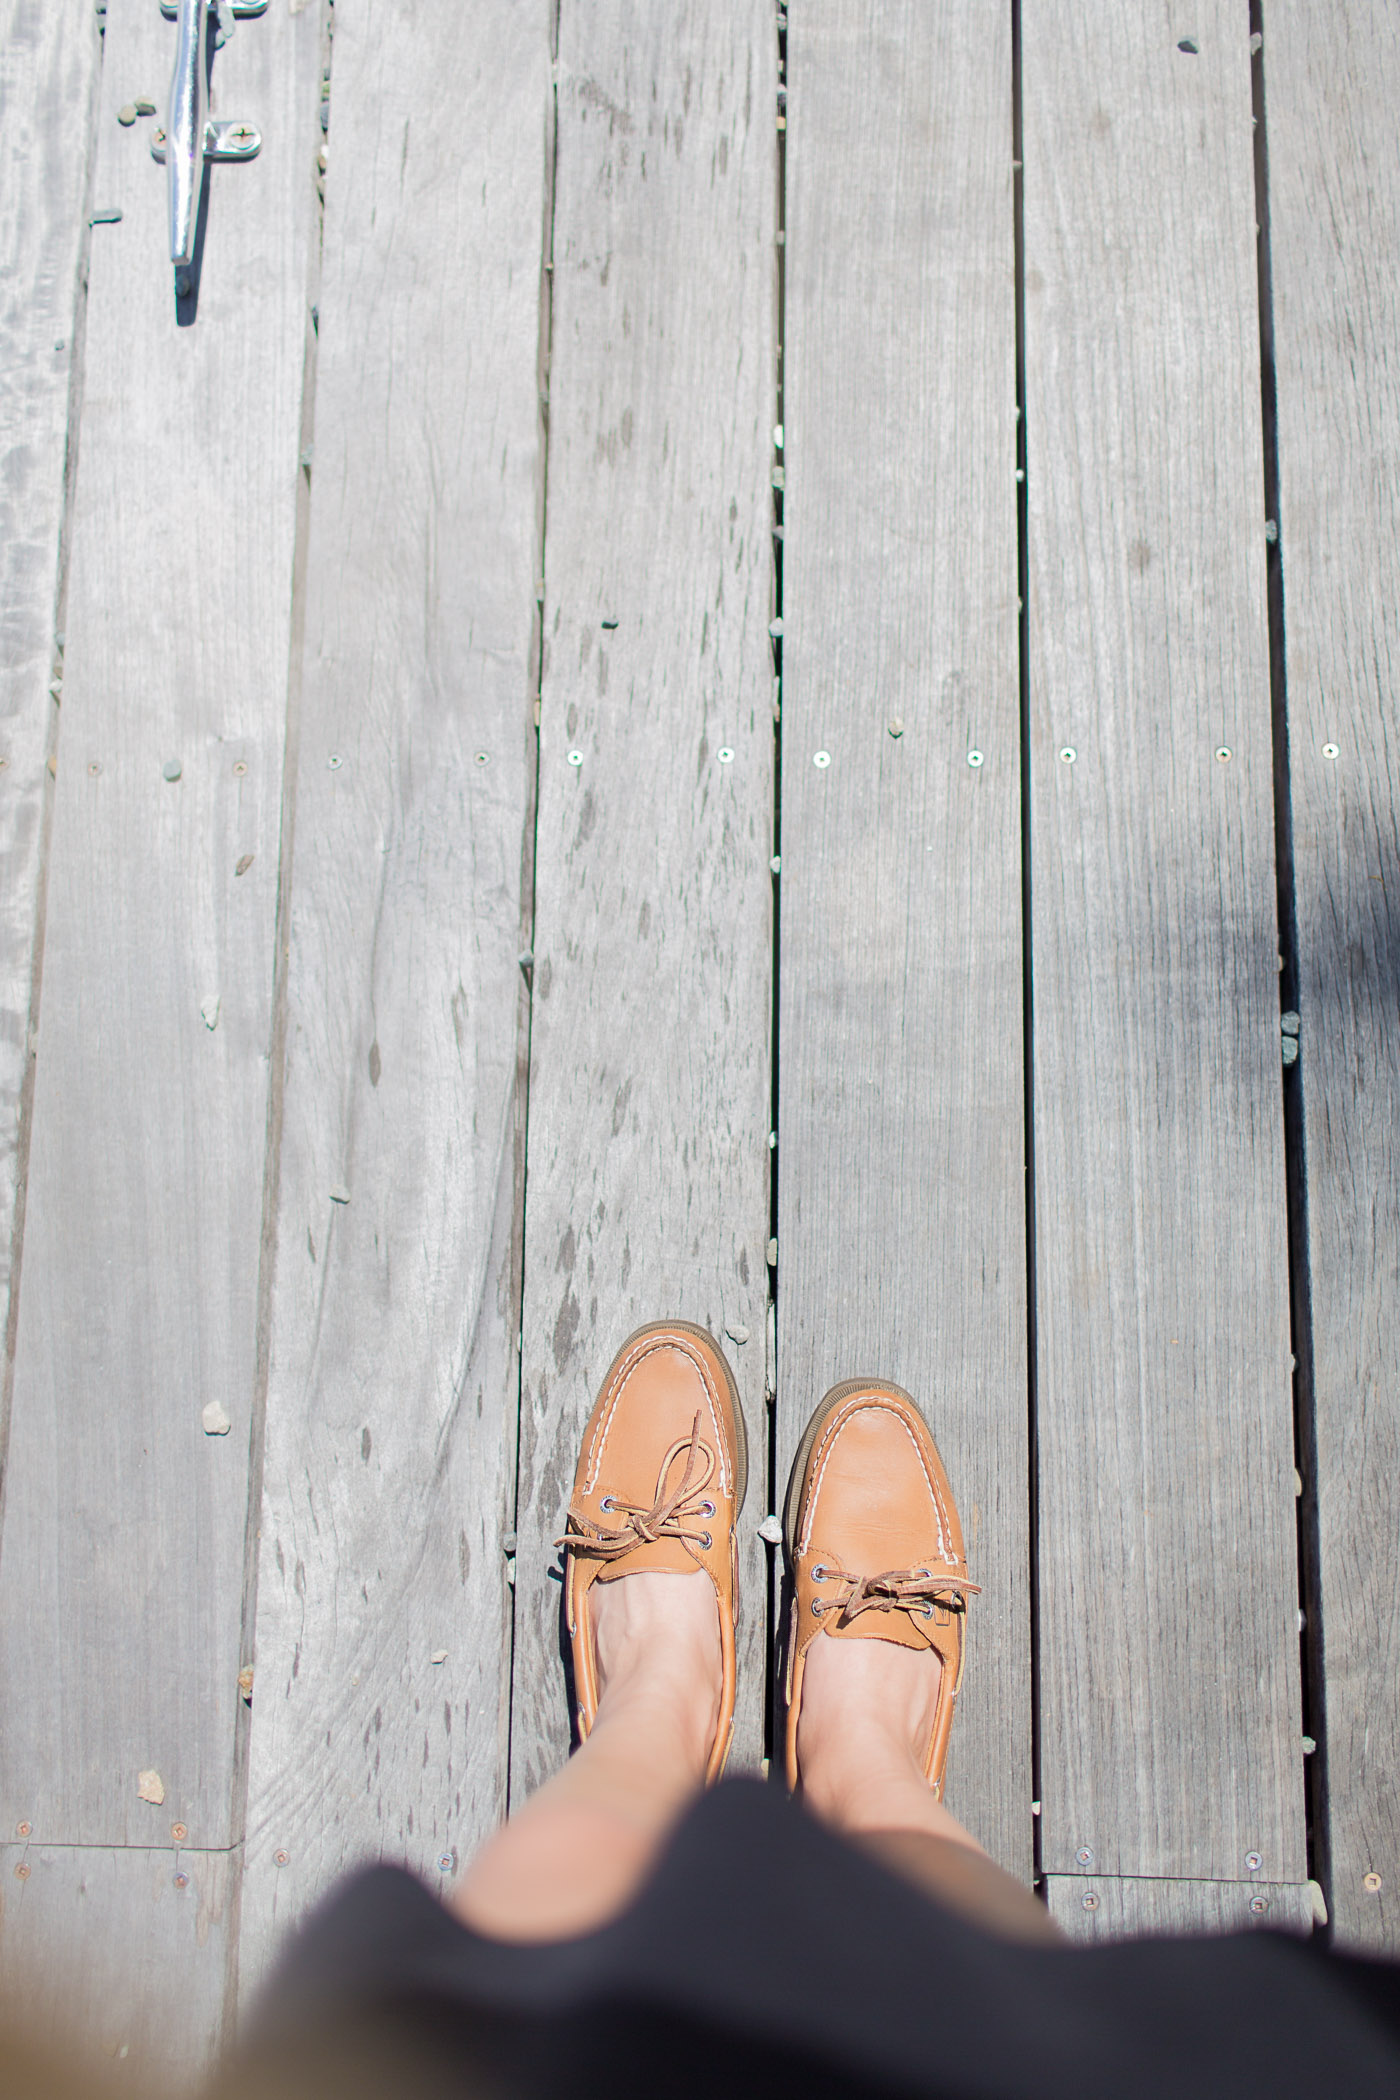 Sperry shoes on dock